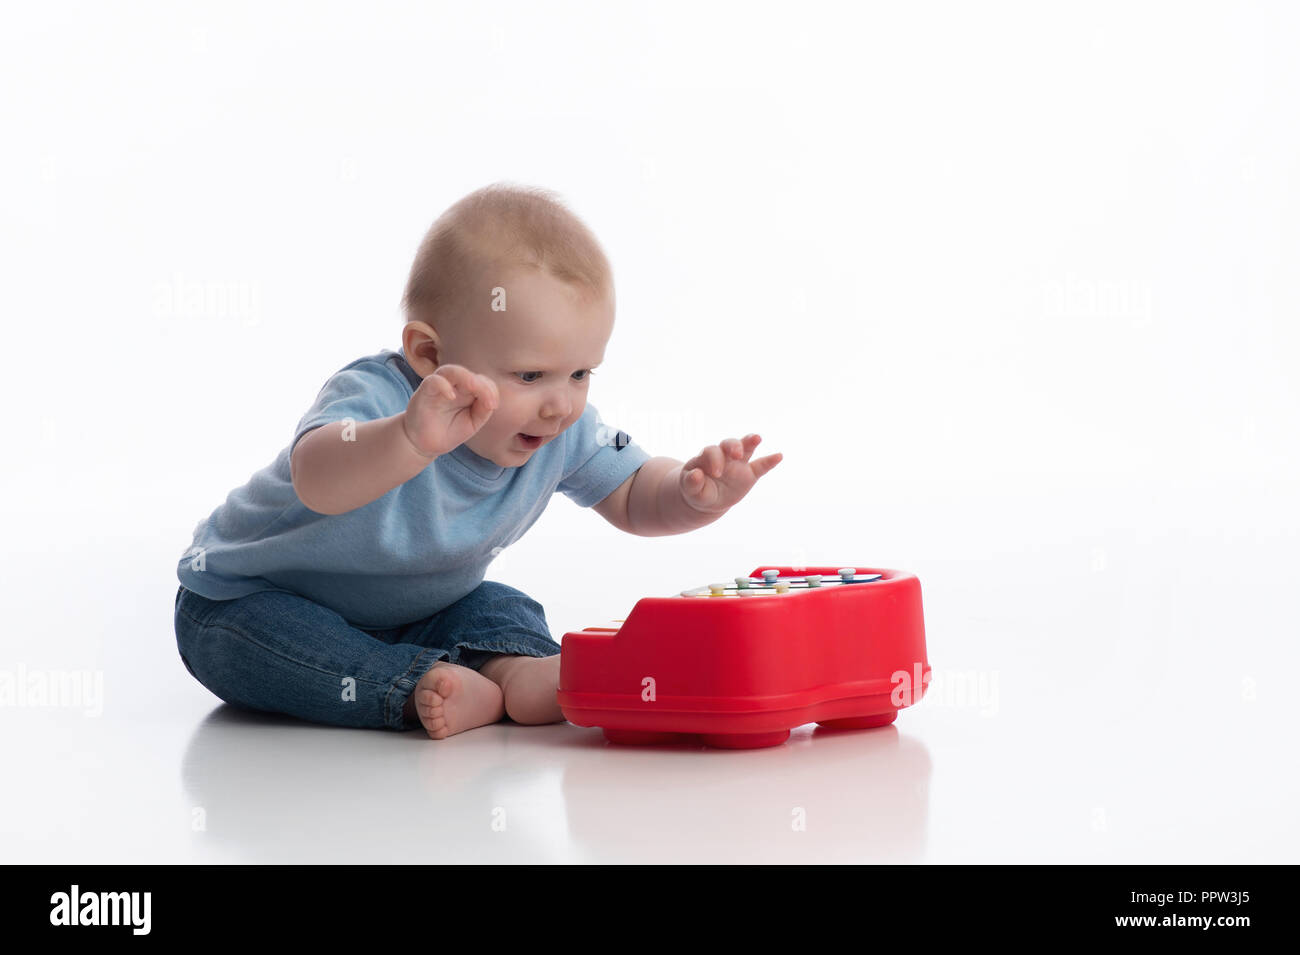 A seven month old baby boy playing with a toy piano. Shot in the studio on a white, seamless backdrop. Stock Photo